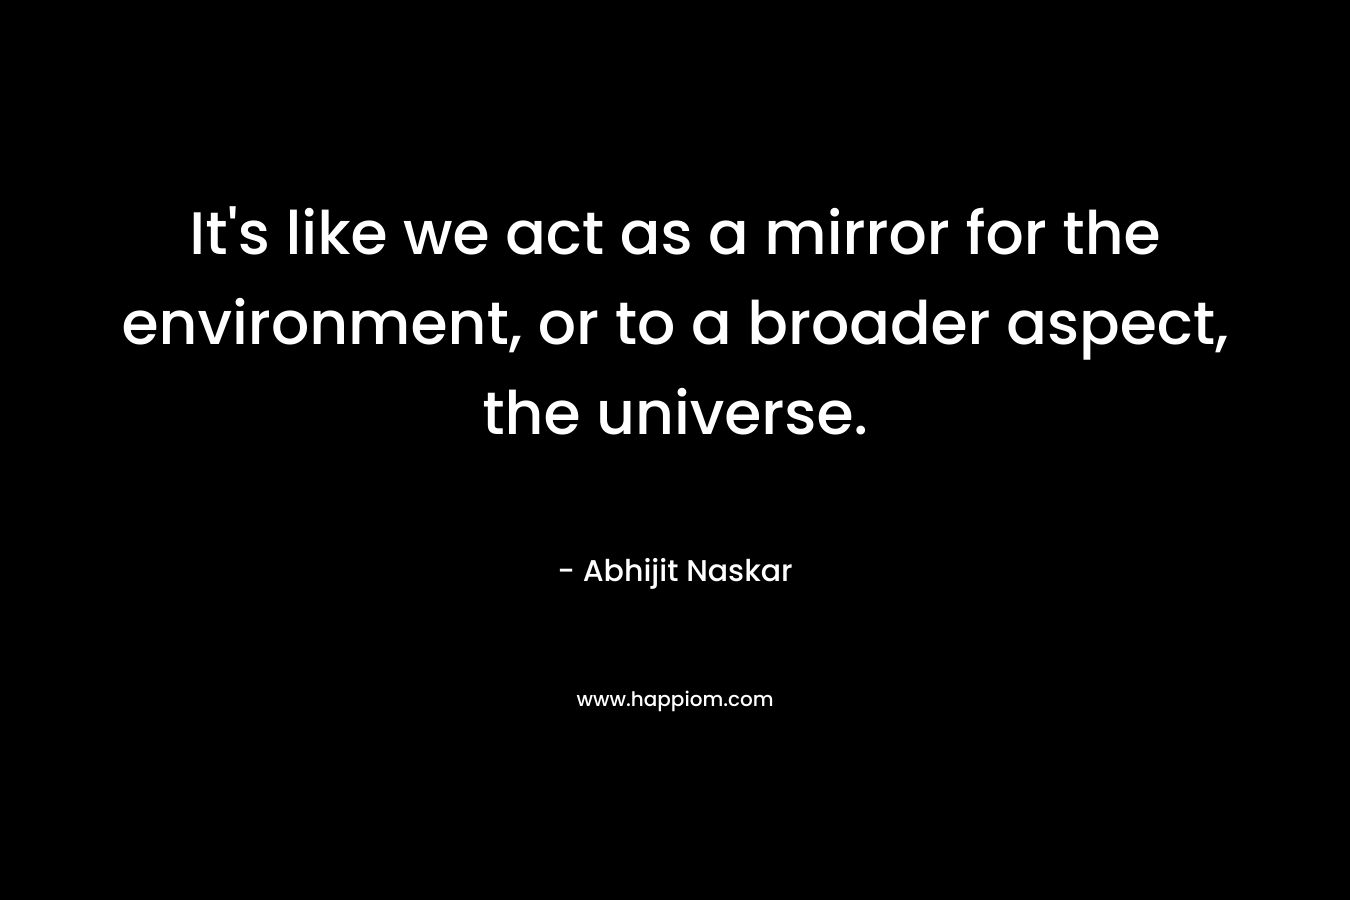 It’s like we act as a mirror for the environment, or to a broader aspect, the universe. – Abhijit Naskar